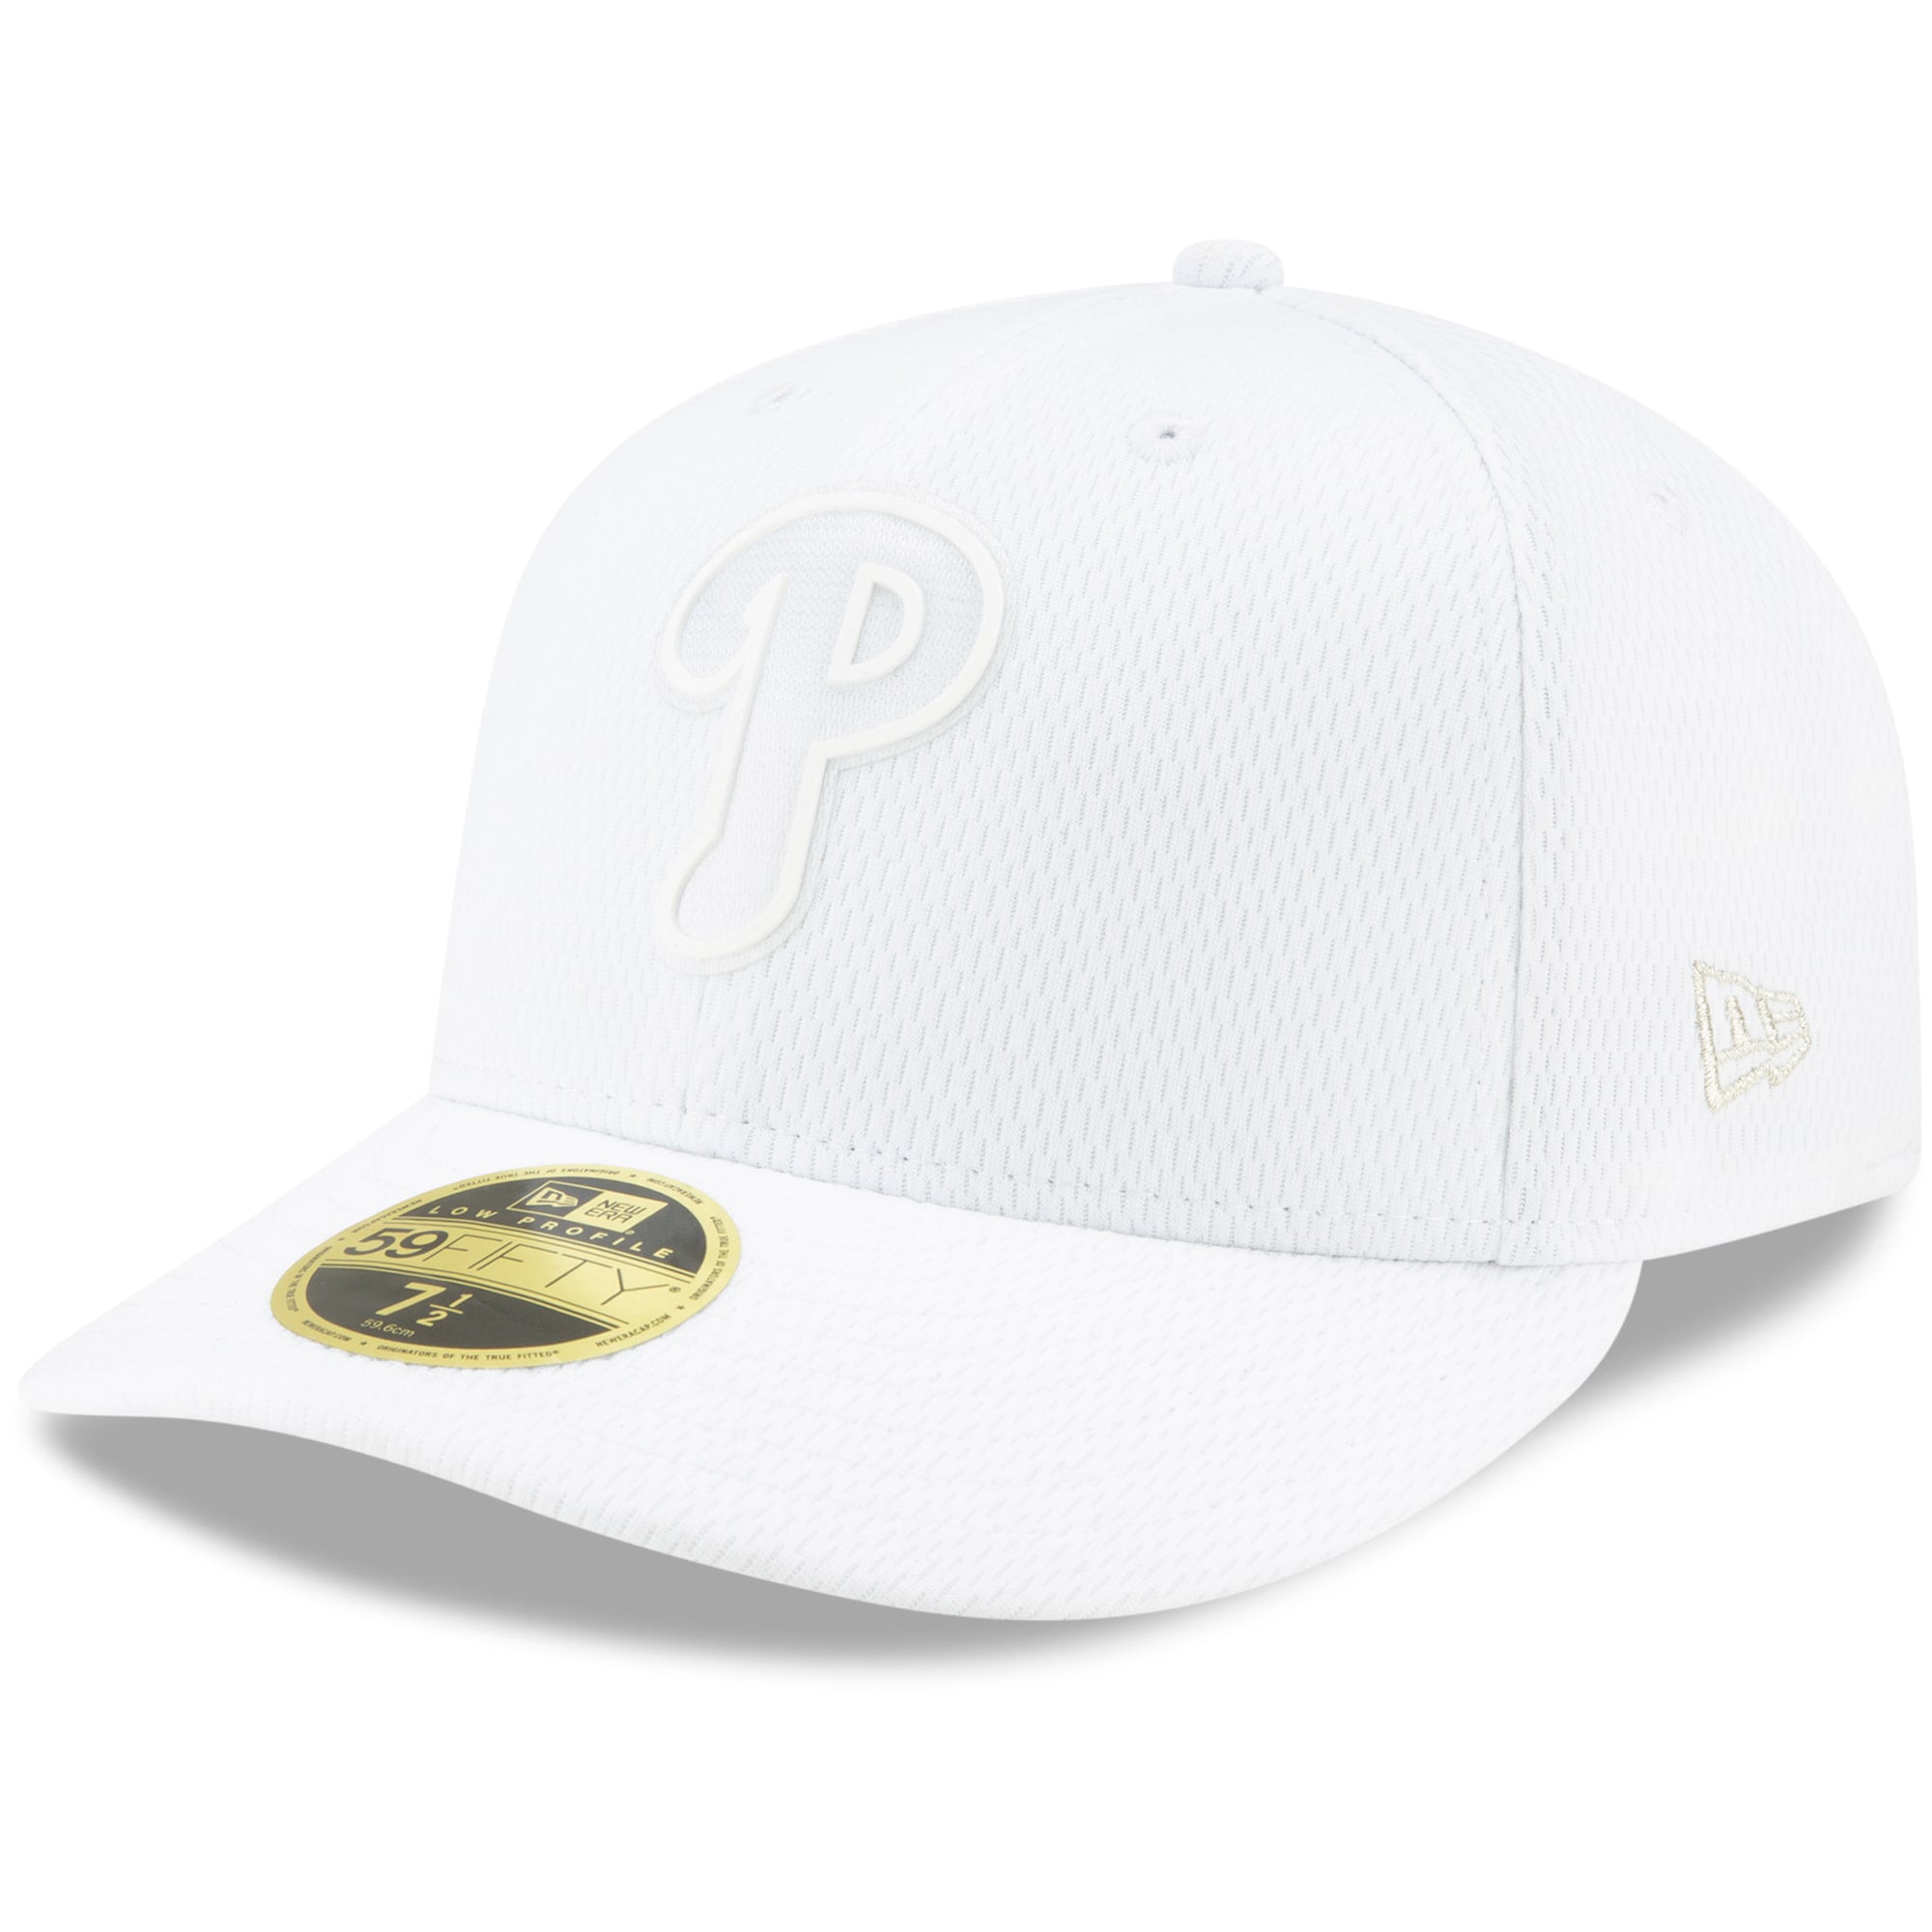 phillies players weekend 2019